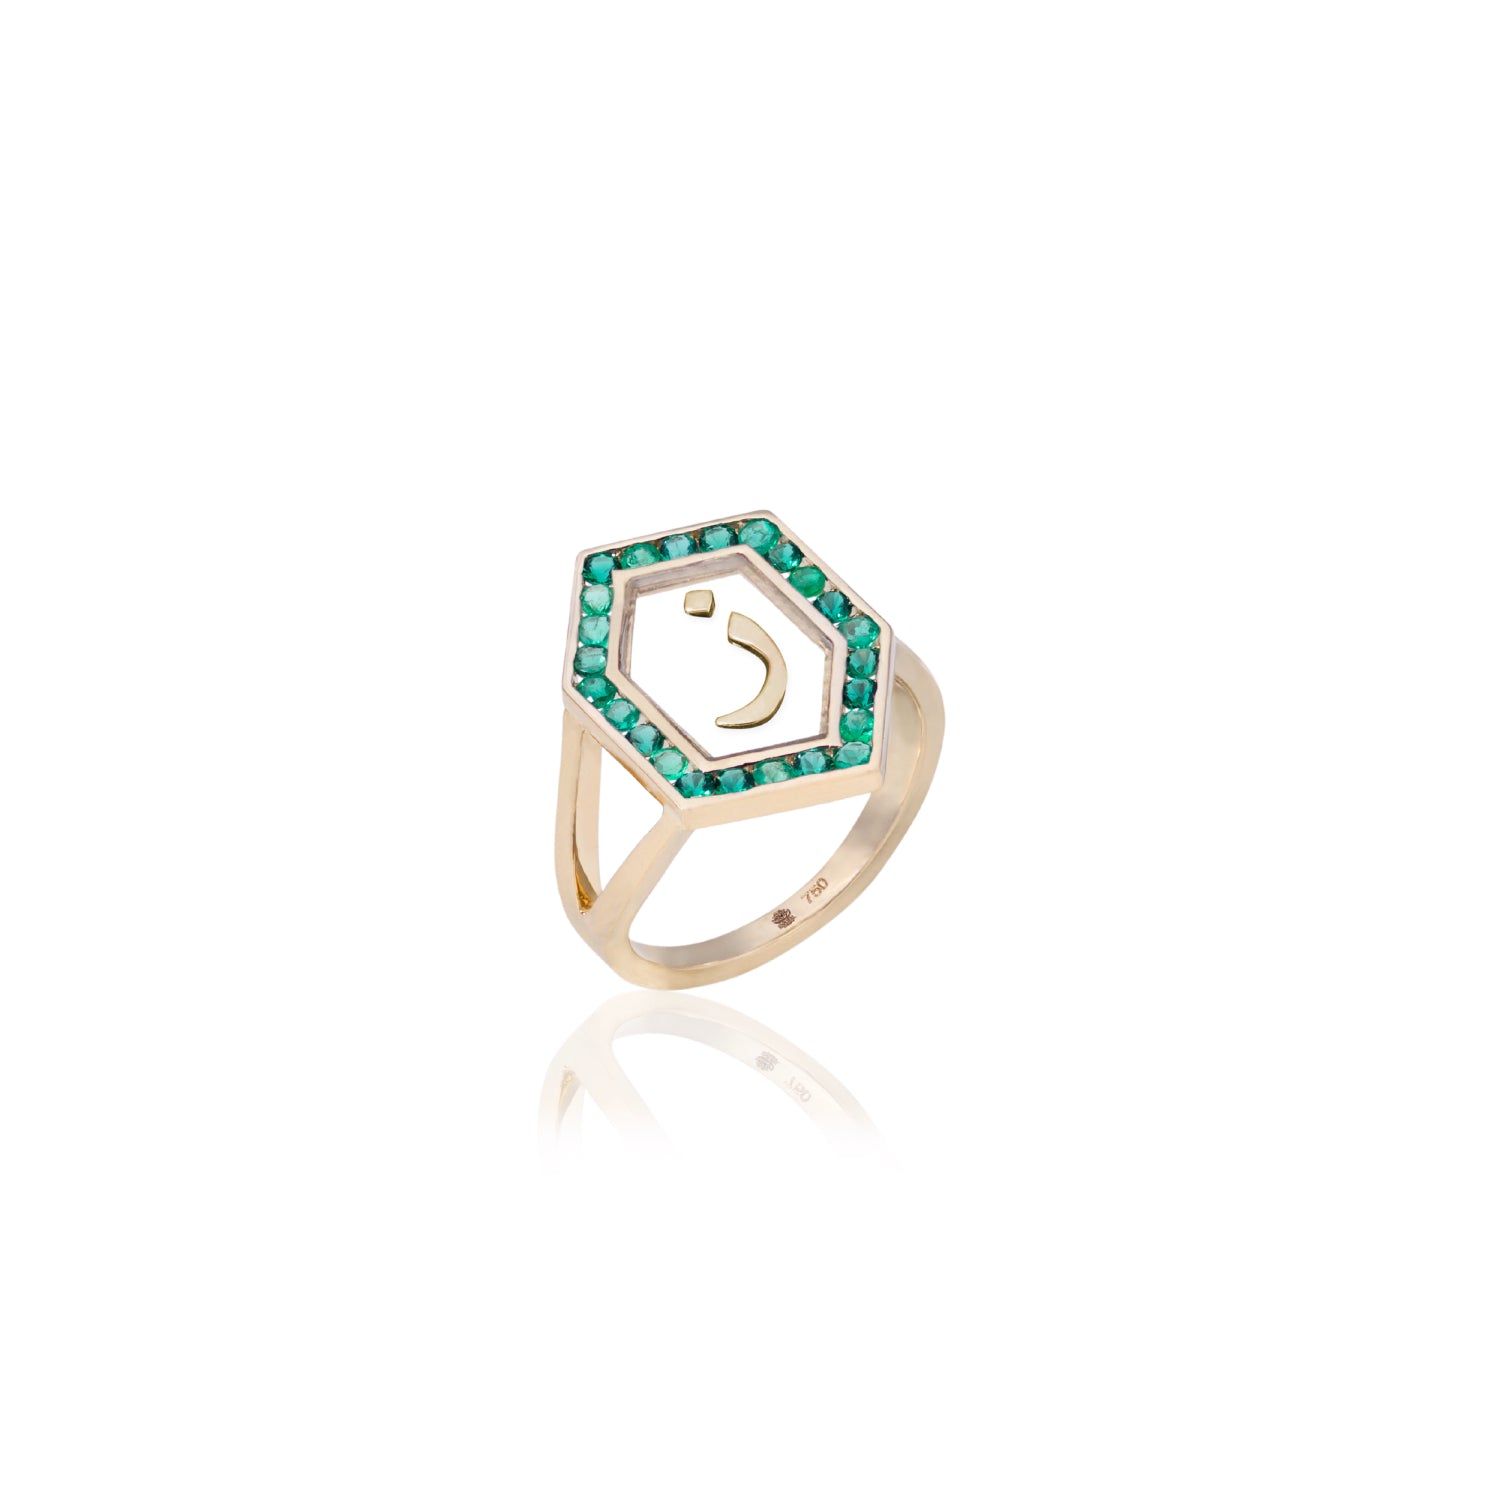 Qamoos 1.0 Letter ز Emerald Ring in Yellow Gold